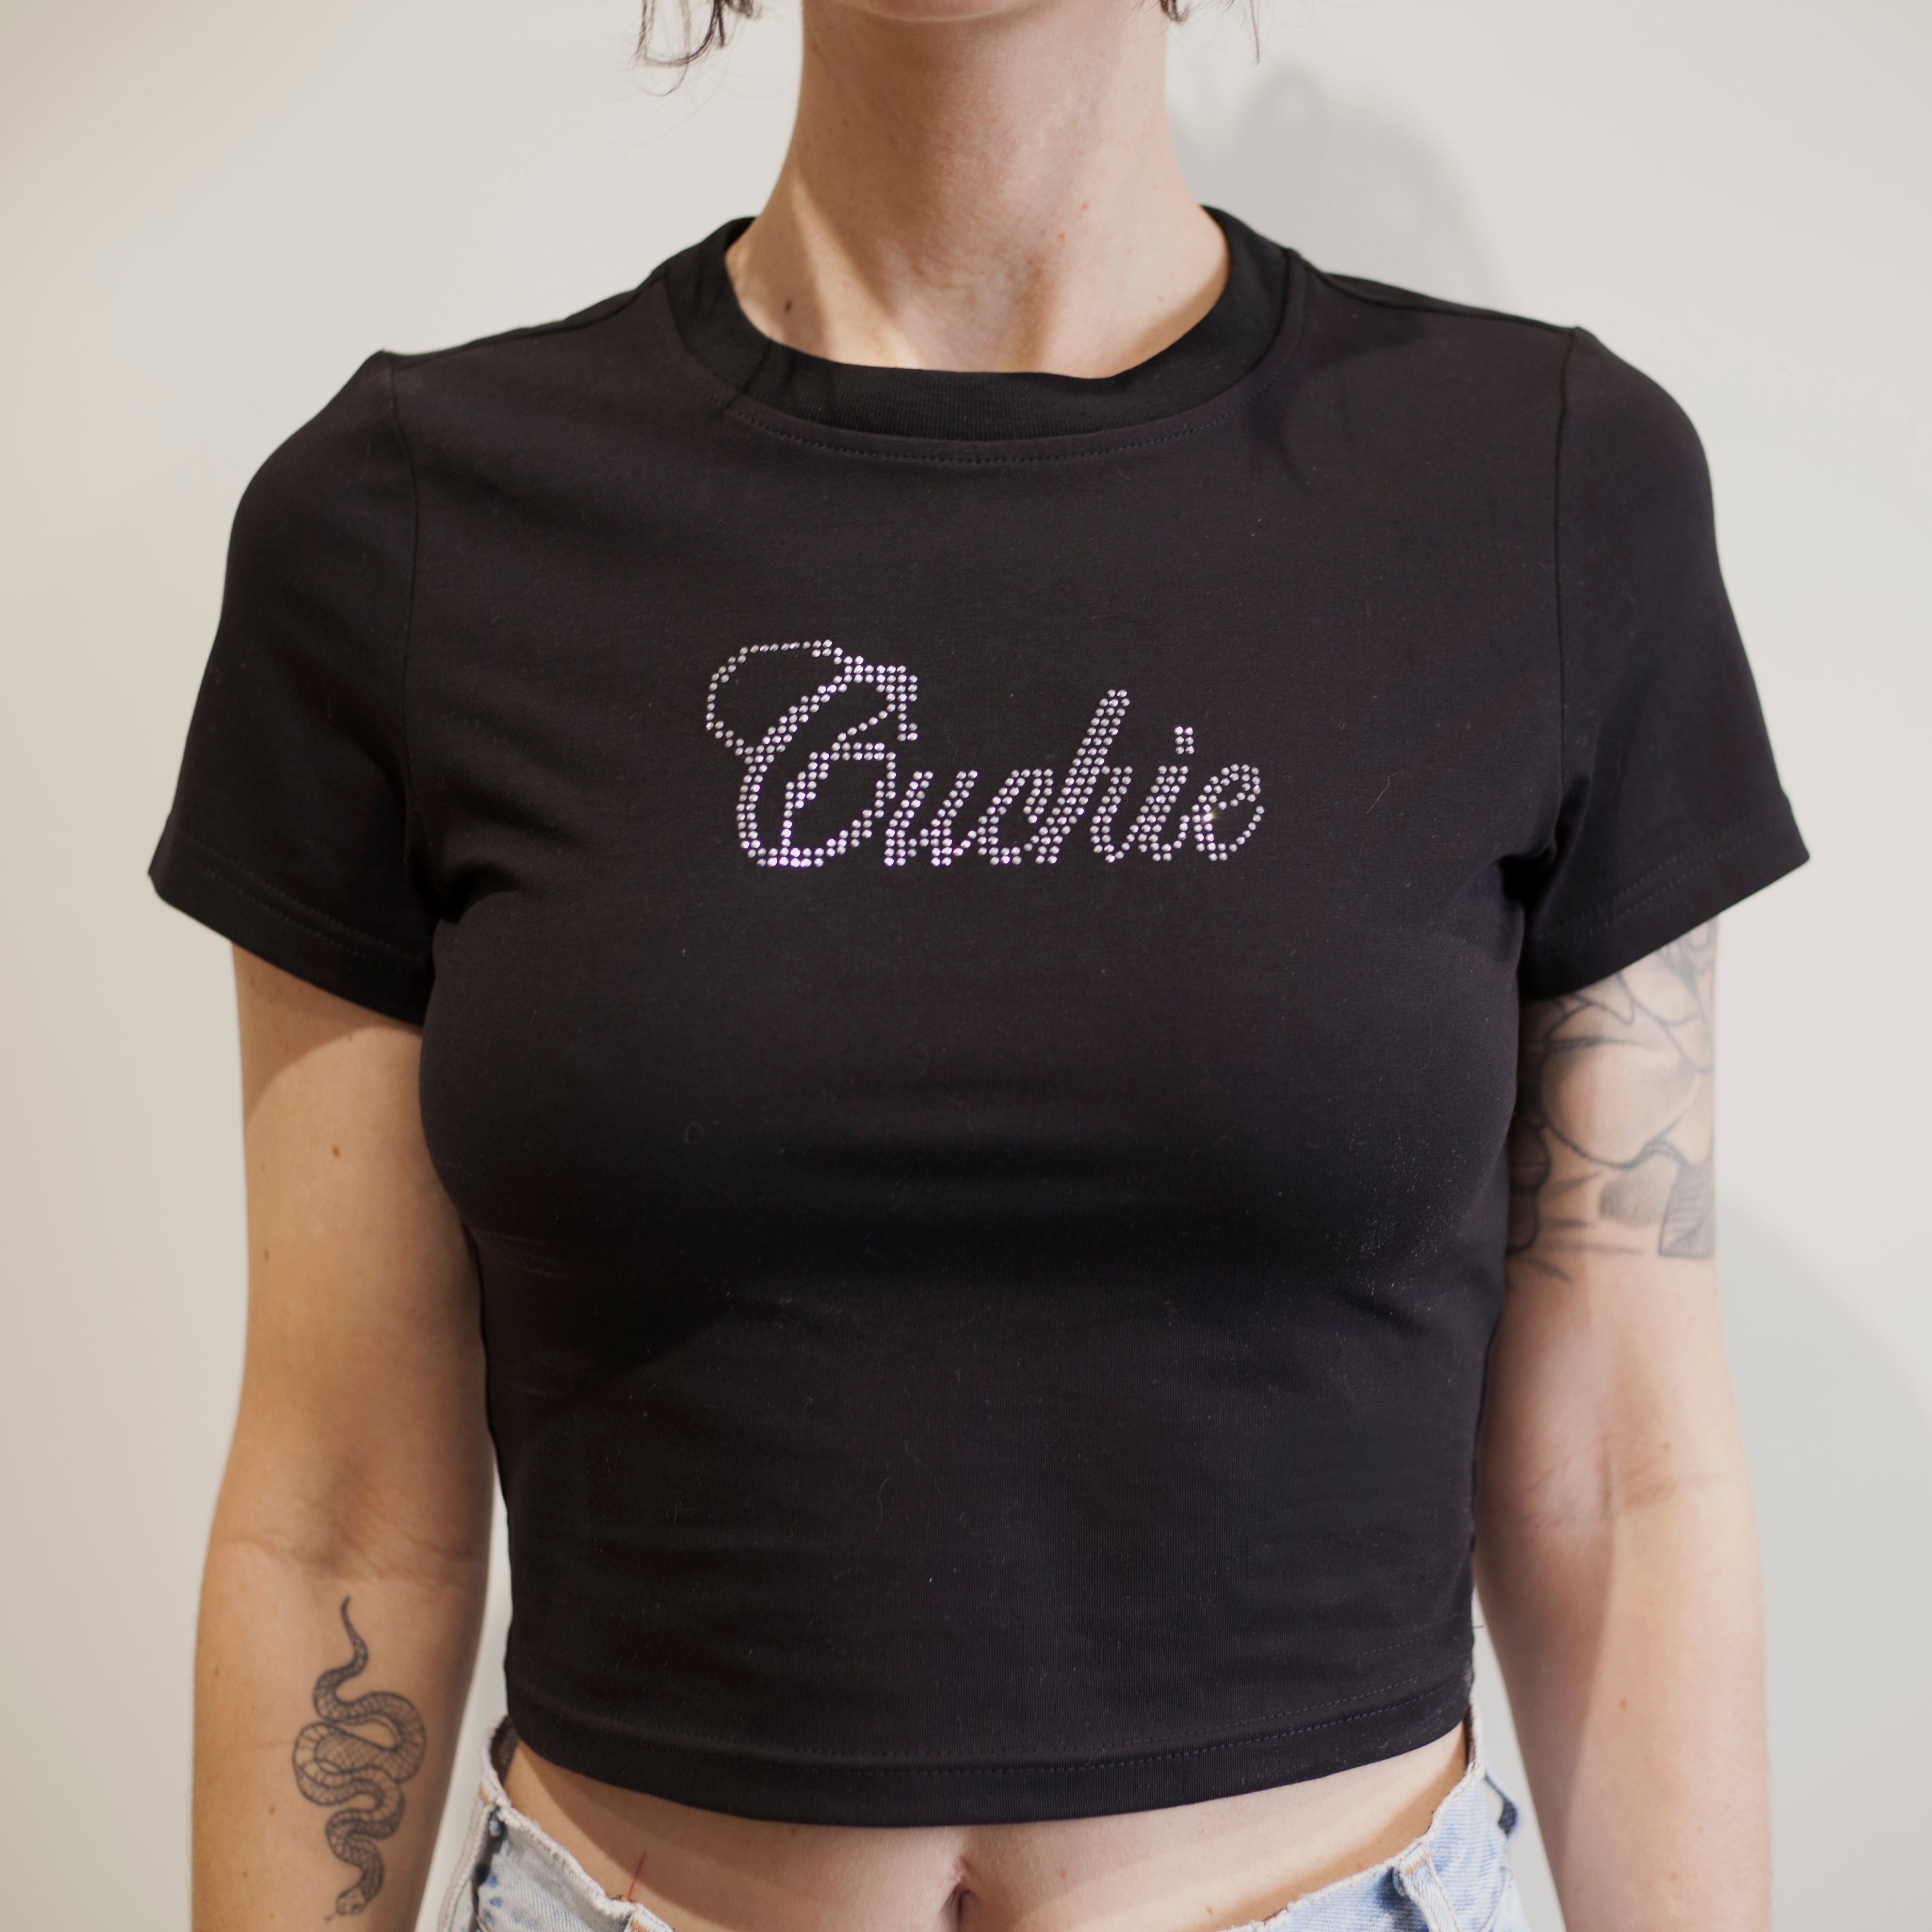 Black cropped t-shirt with "Cuchie" text in rhinestones on model